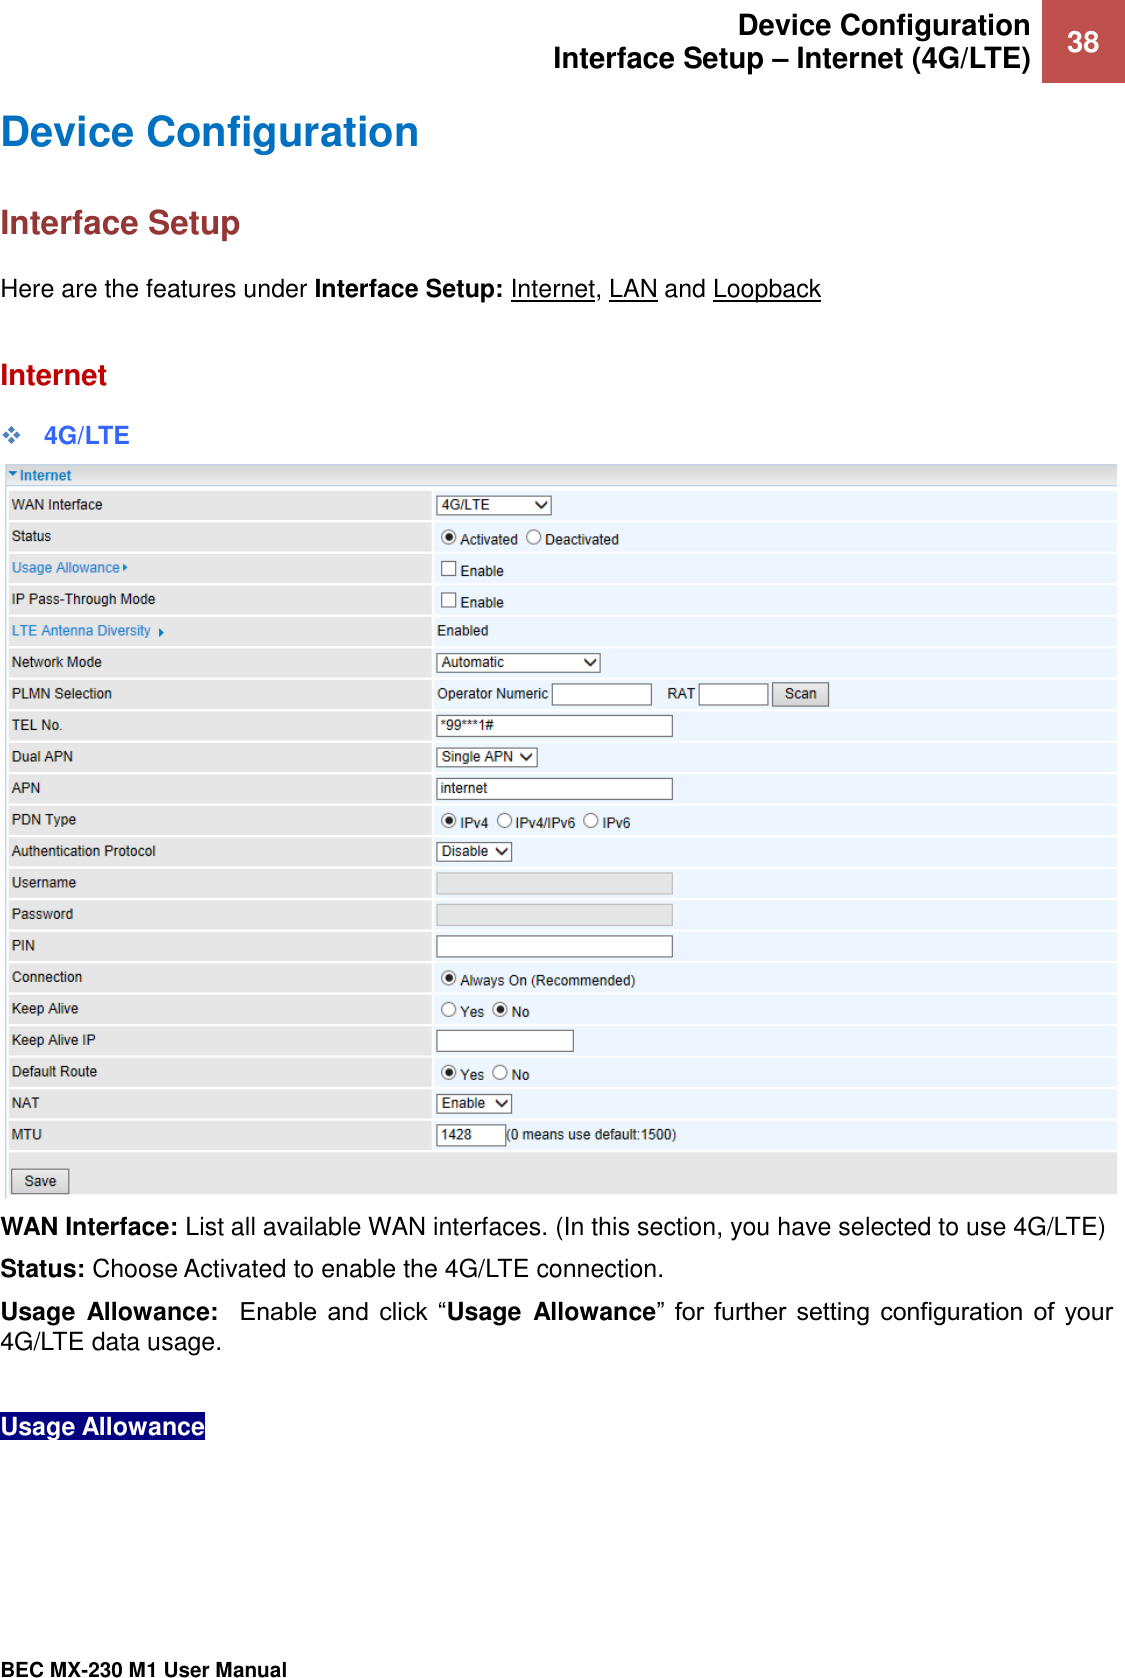  Device Configuration Interface Setup – Internet (4G/LTE) 38   BEC MX-230 M1 User Manual  Device Configuration  Interface Setup Here are the features under Interface Setup: Internet, LAN and Loopback  Internet ❖ 4G/LTE  WAN Interface: List all available WAN interfaces. (In this section, you have selected to use 4G/LTE) Status: Choose Activated to enable the 4G/LTE connection. Usage  Allowance:   Enable  and  click  “Usage  Allowance”  for  further  setting  configuration  of  your 4G/LTE data usage.   Usage Allowance      